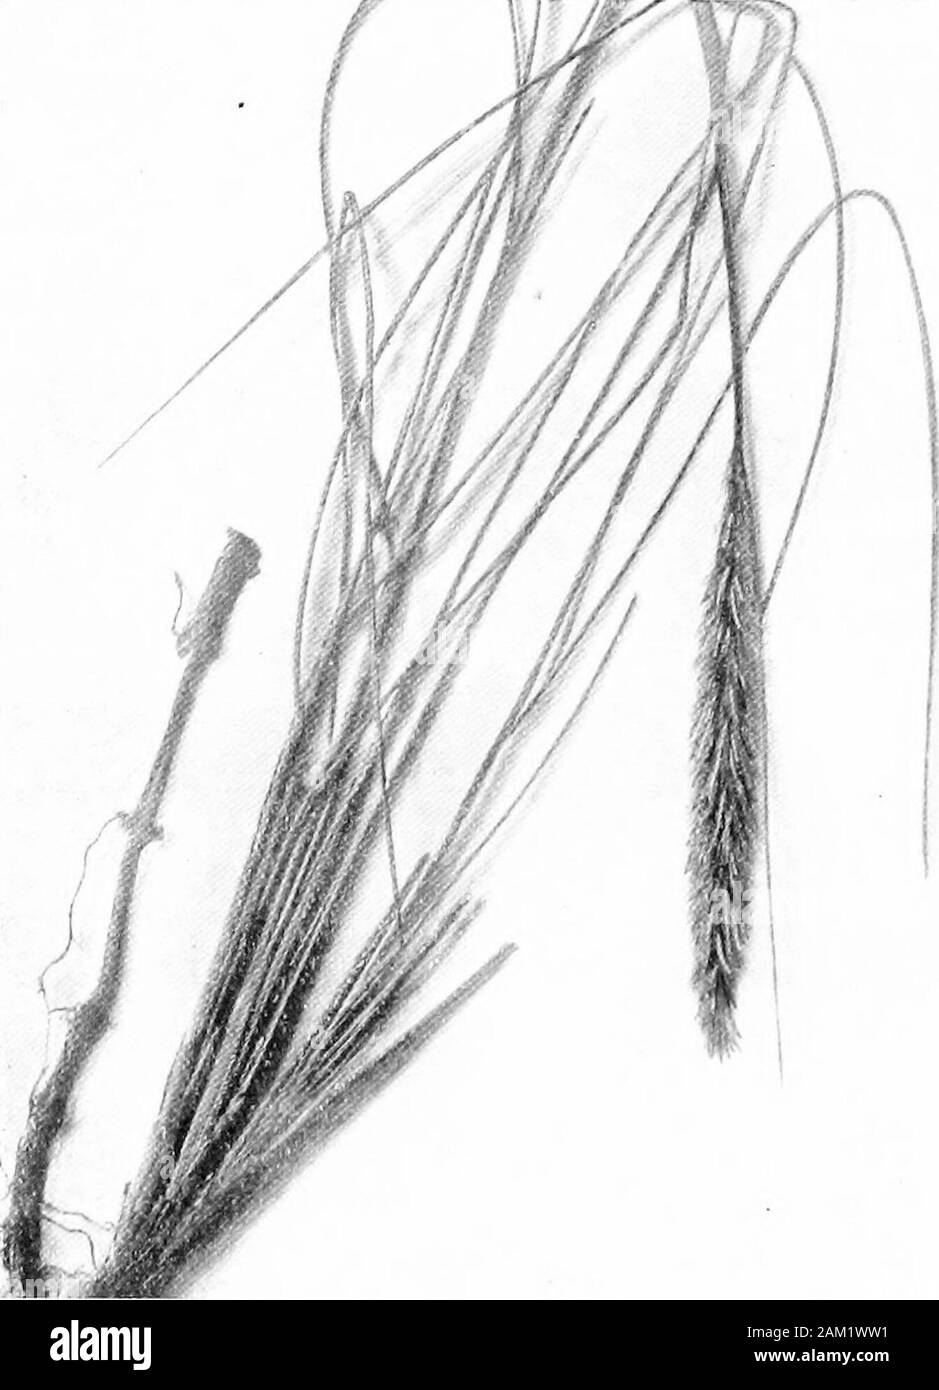 British grasses and their employment in agriculture . wer than those ofP. pratensis. Outer palea acute at the apex, five-nerved; onlythe dorsal and marginal nerves are prominent, which gives asharply triangular cross-section to the seed. Hairs may bepresent on the lower half of the dorsal nerve (keel), but none arepresent on the remaining nerves. The web at the base ofthe palese is less copious than that of P. pratensis. Commerciallycleaned seeds are usually quite free from hairs except for atrace of the web. (Fig. .143.) Psamma arenaria, Beauv. (Sea Mat-grass.) (Fig. 146.) A perennial, freque Stock Photo